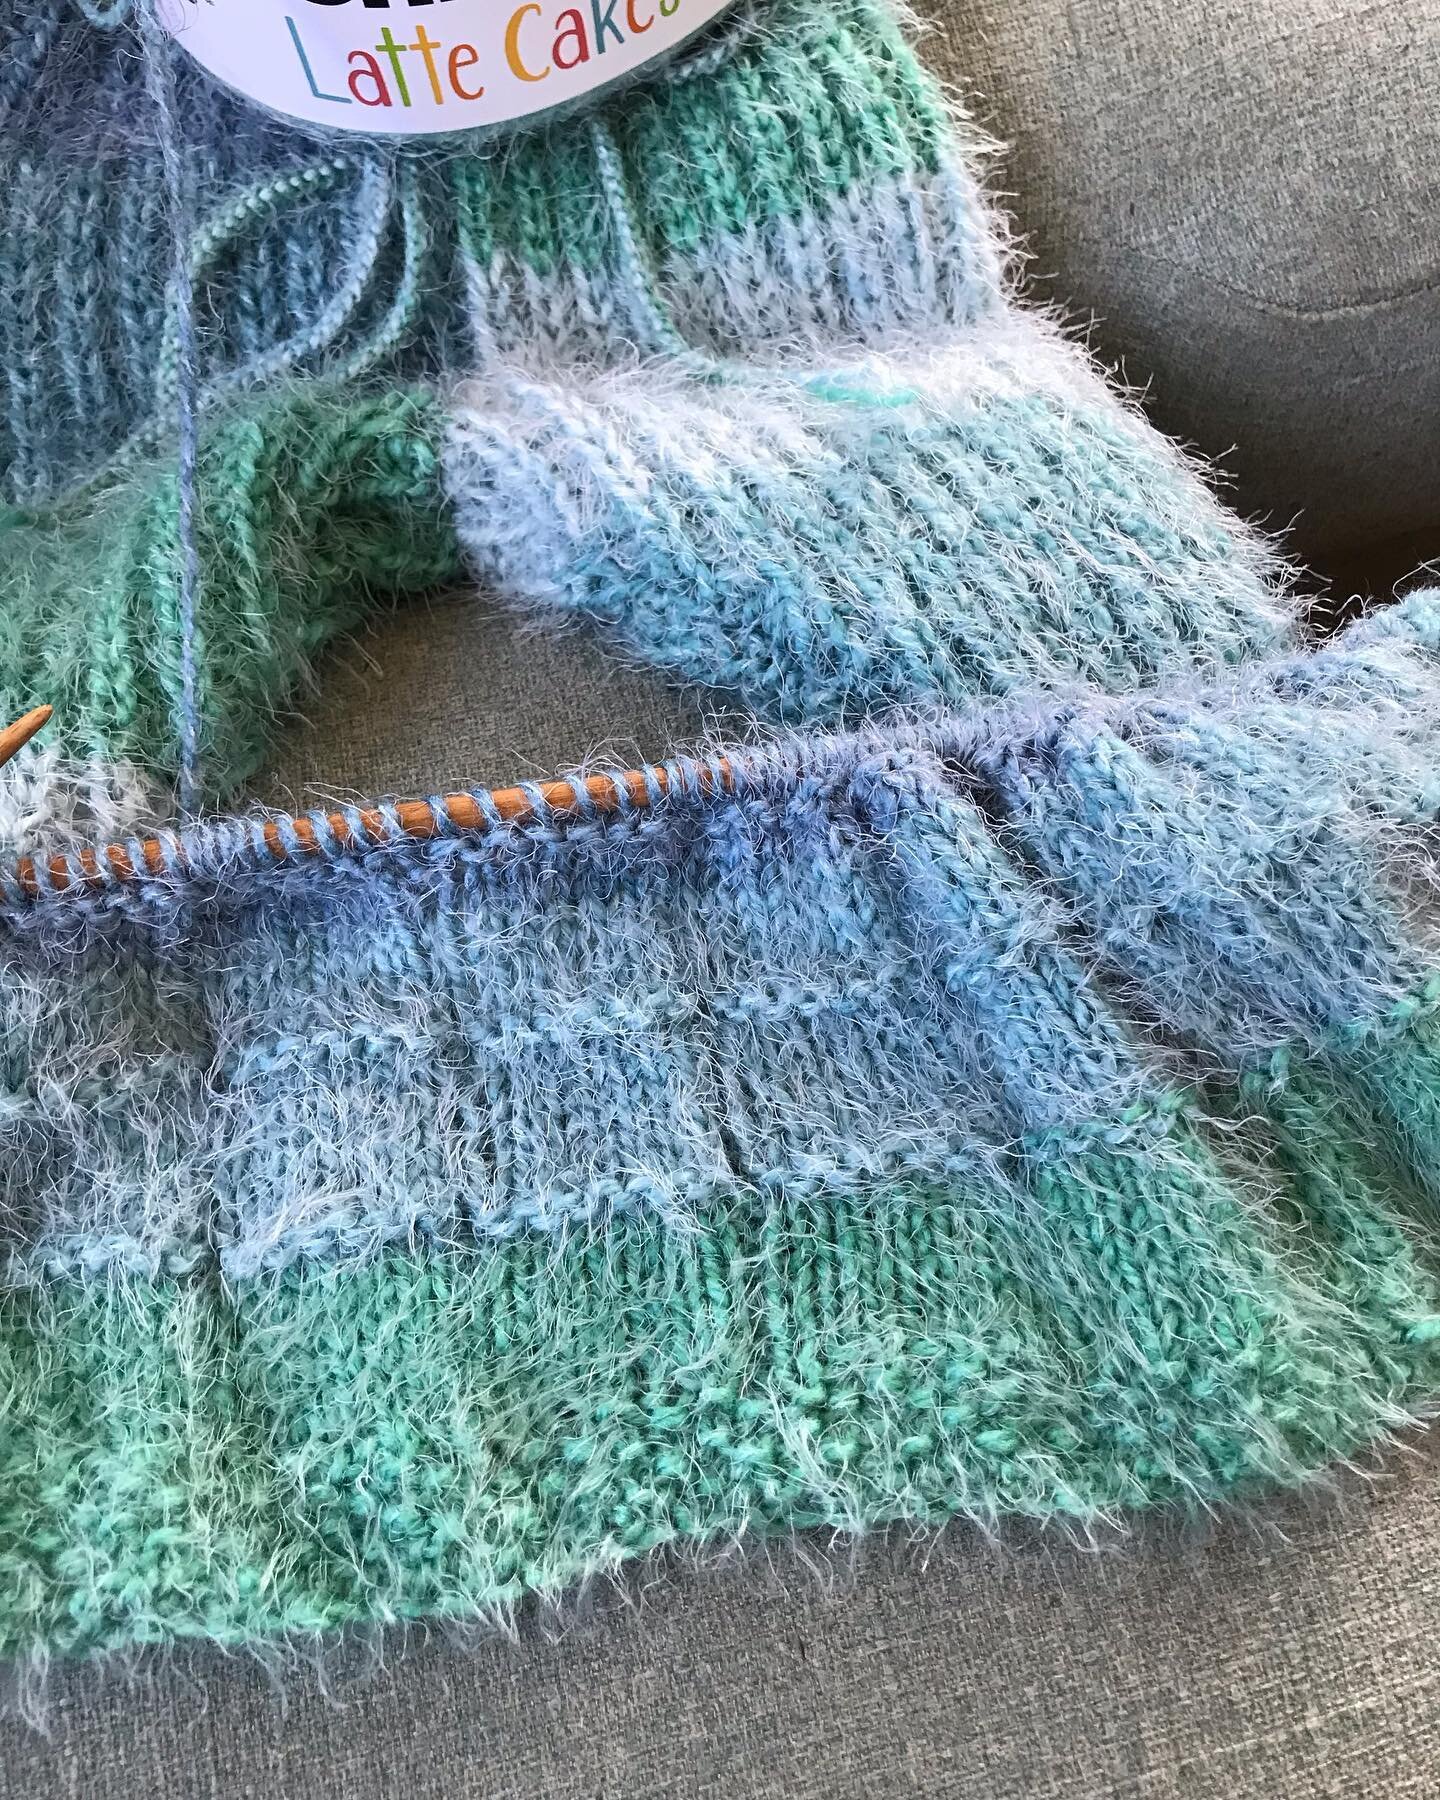 I&rsquo;m working on a few pram blankets now that the weather gets colder. Patterns are almost finished and should be available soon. 

#baby #babyblanket #pram #pramblanket #gift #knitting #knitted #pattern #wool #yarn #aqua #meditation #zen #handma